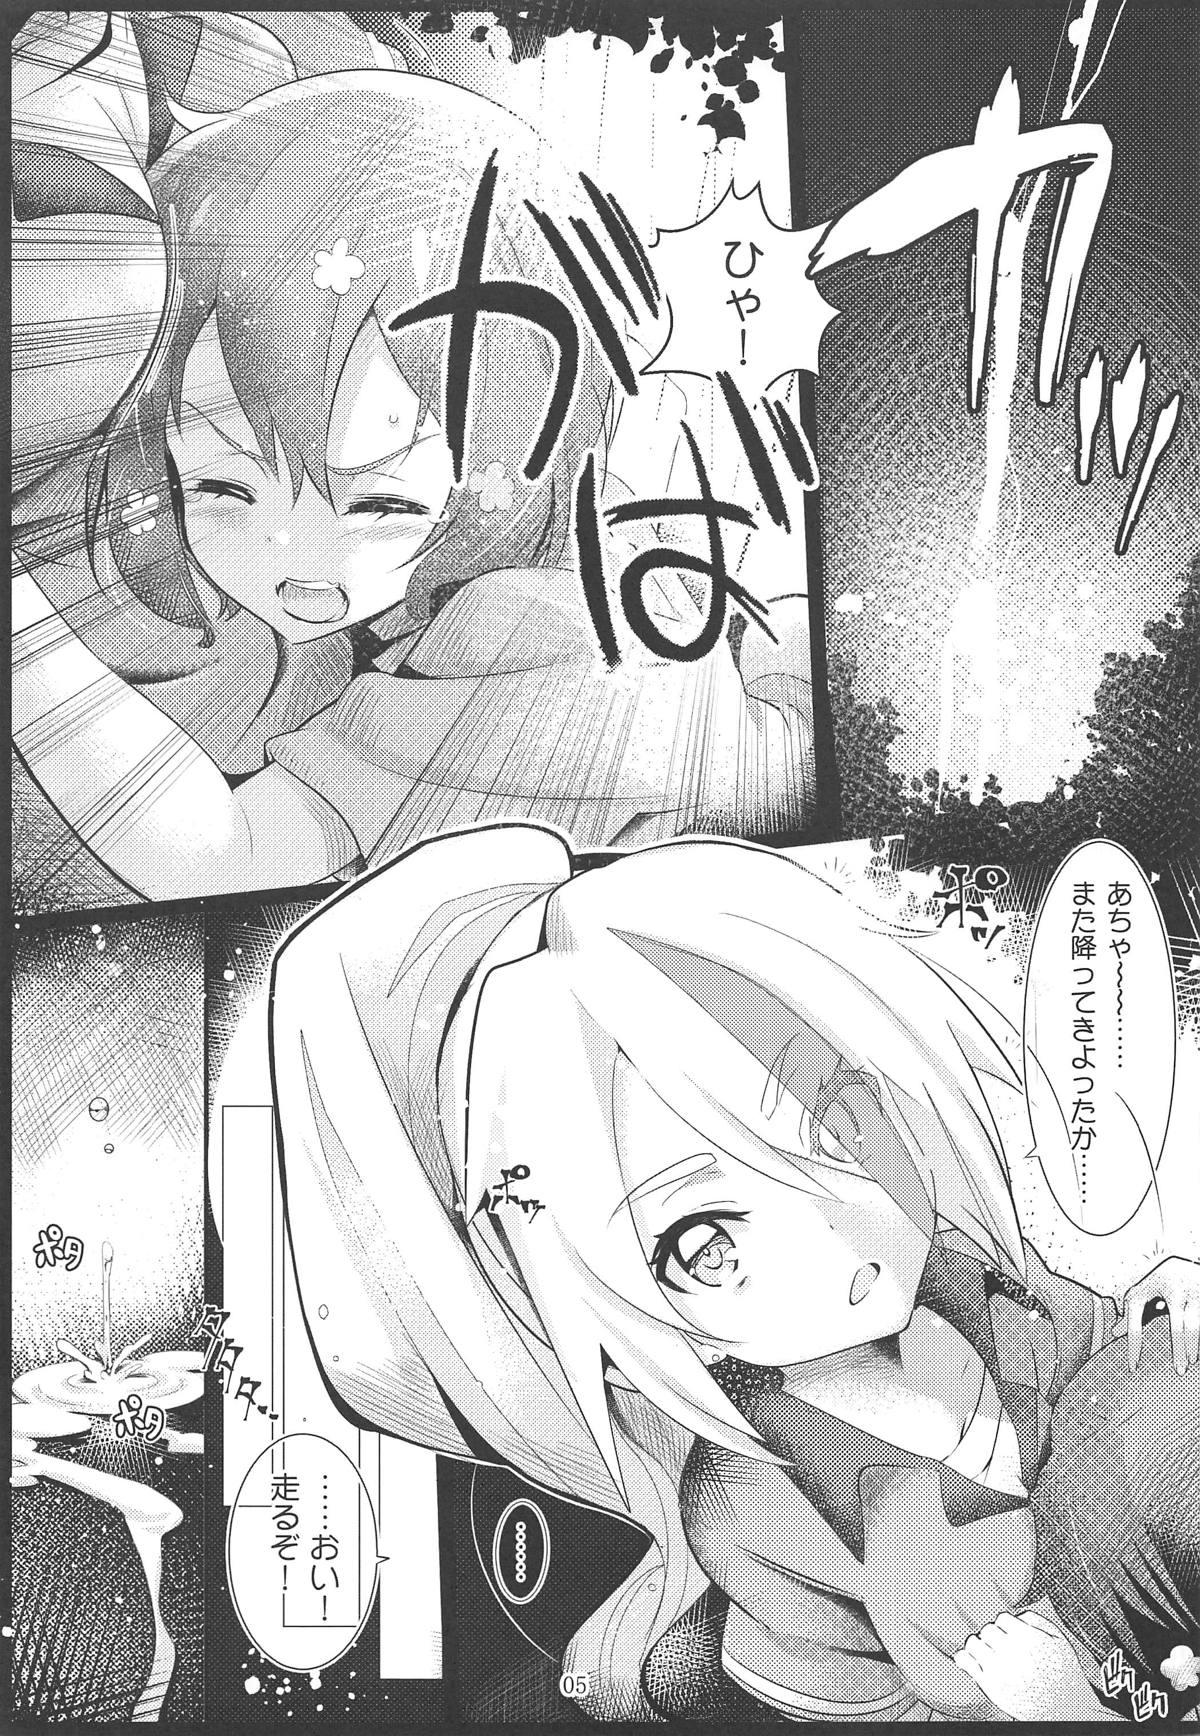 Action GREATFUL ZOMBIE - Zombie land saga Perfect Teen - Page 4